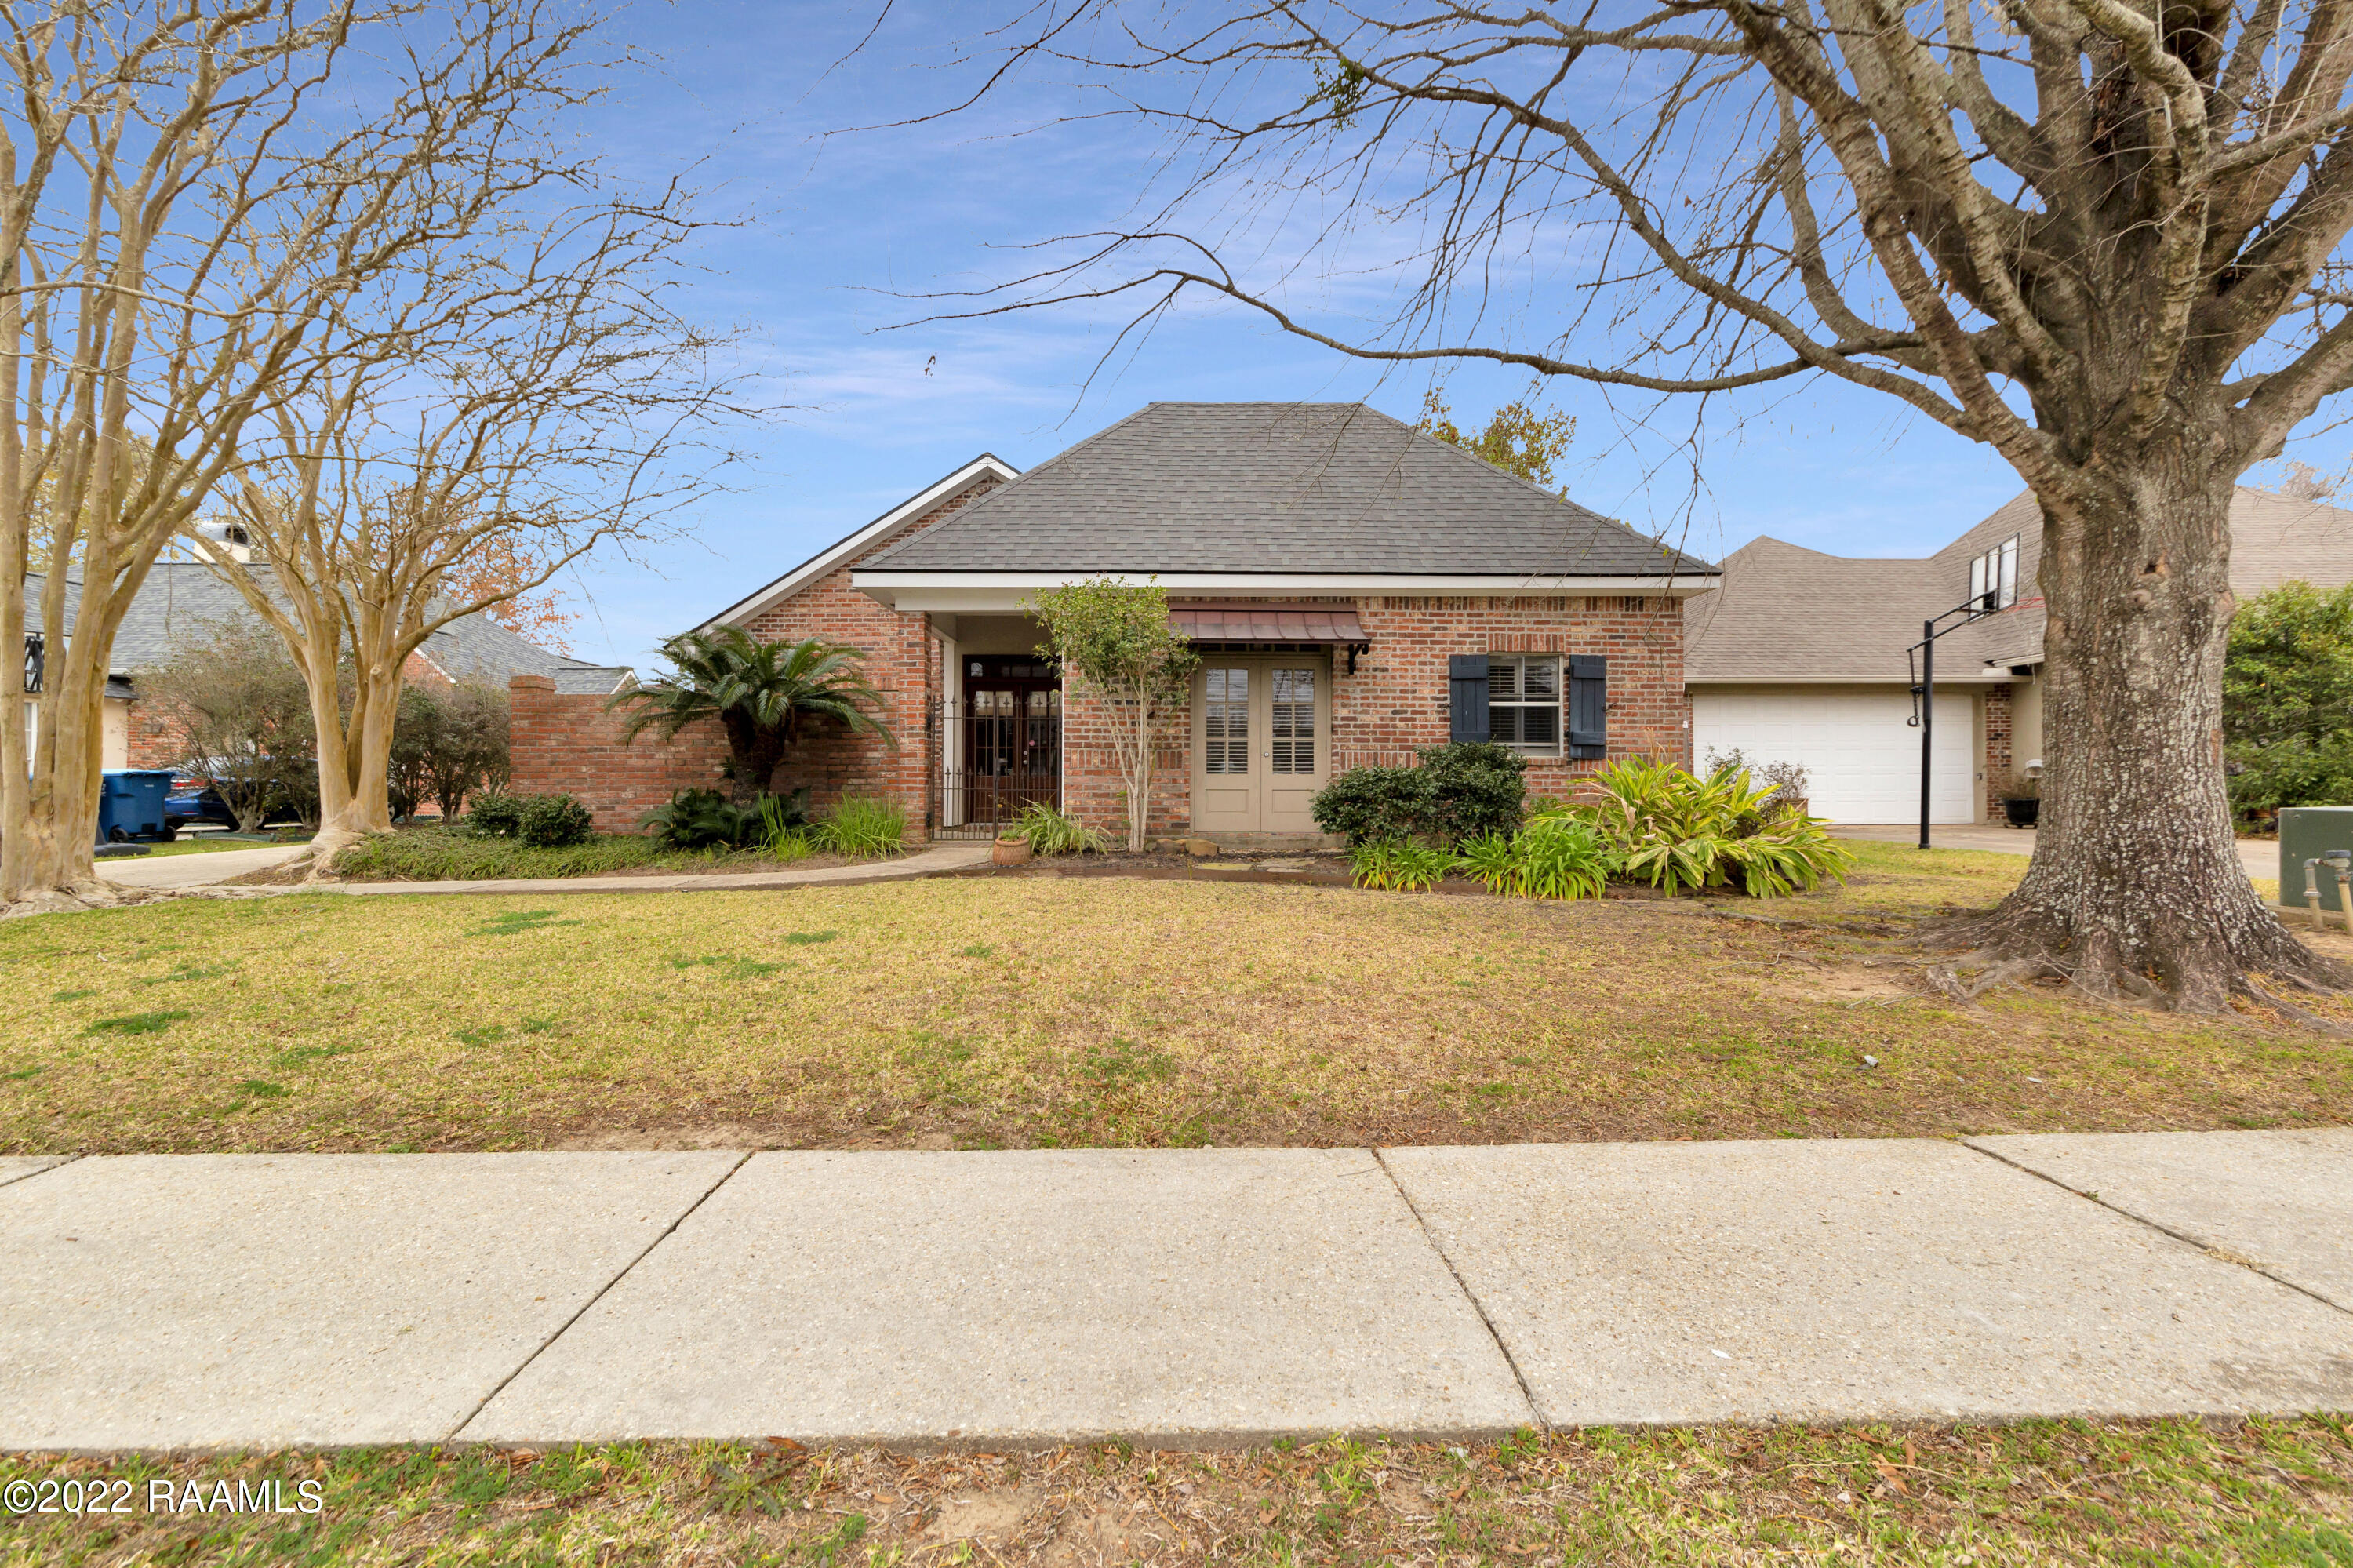 122 Briarmeadow Drive Lafayette Home Listings - Duncan Realty Professionals, LLC Lafayette Real Estate